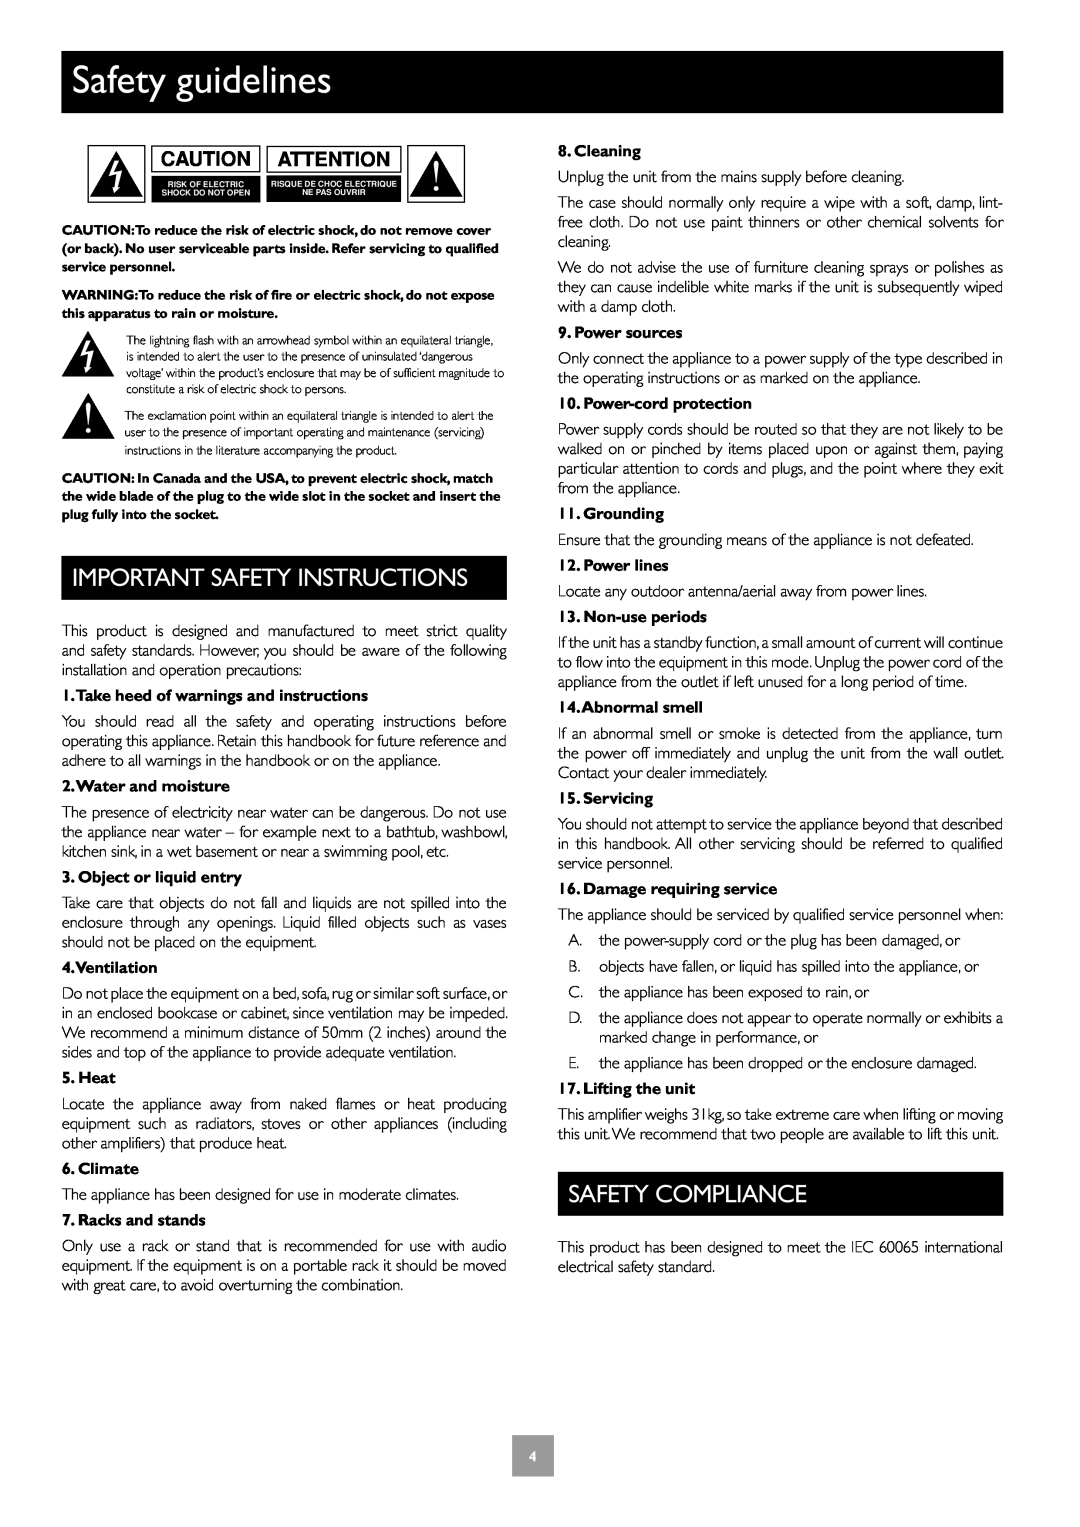 Arcam Multichannel Power Amplifier manual Safety guidelines, Important Safety Instructions, Safety Compliance 